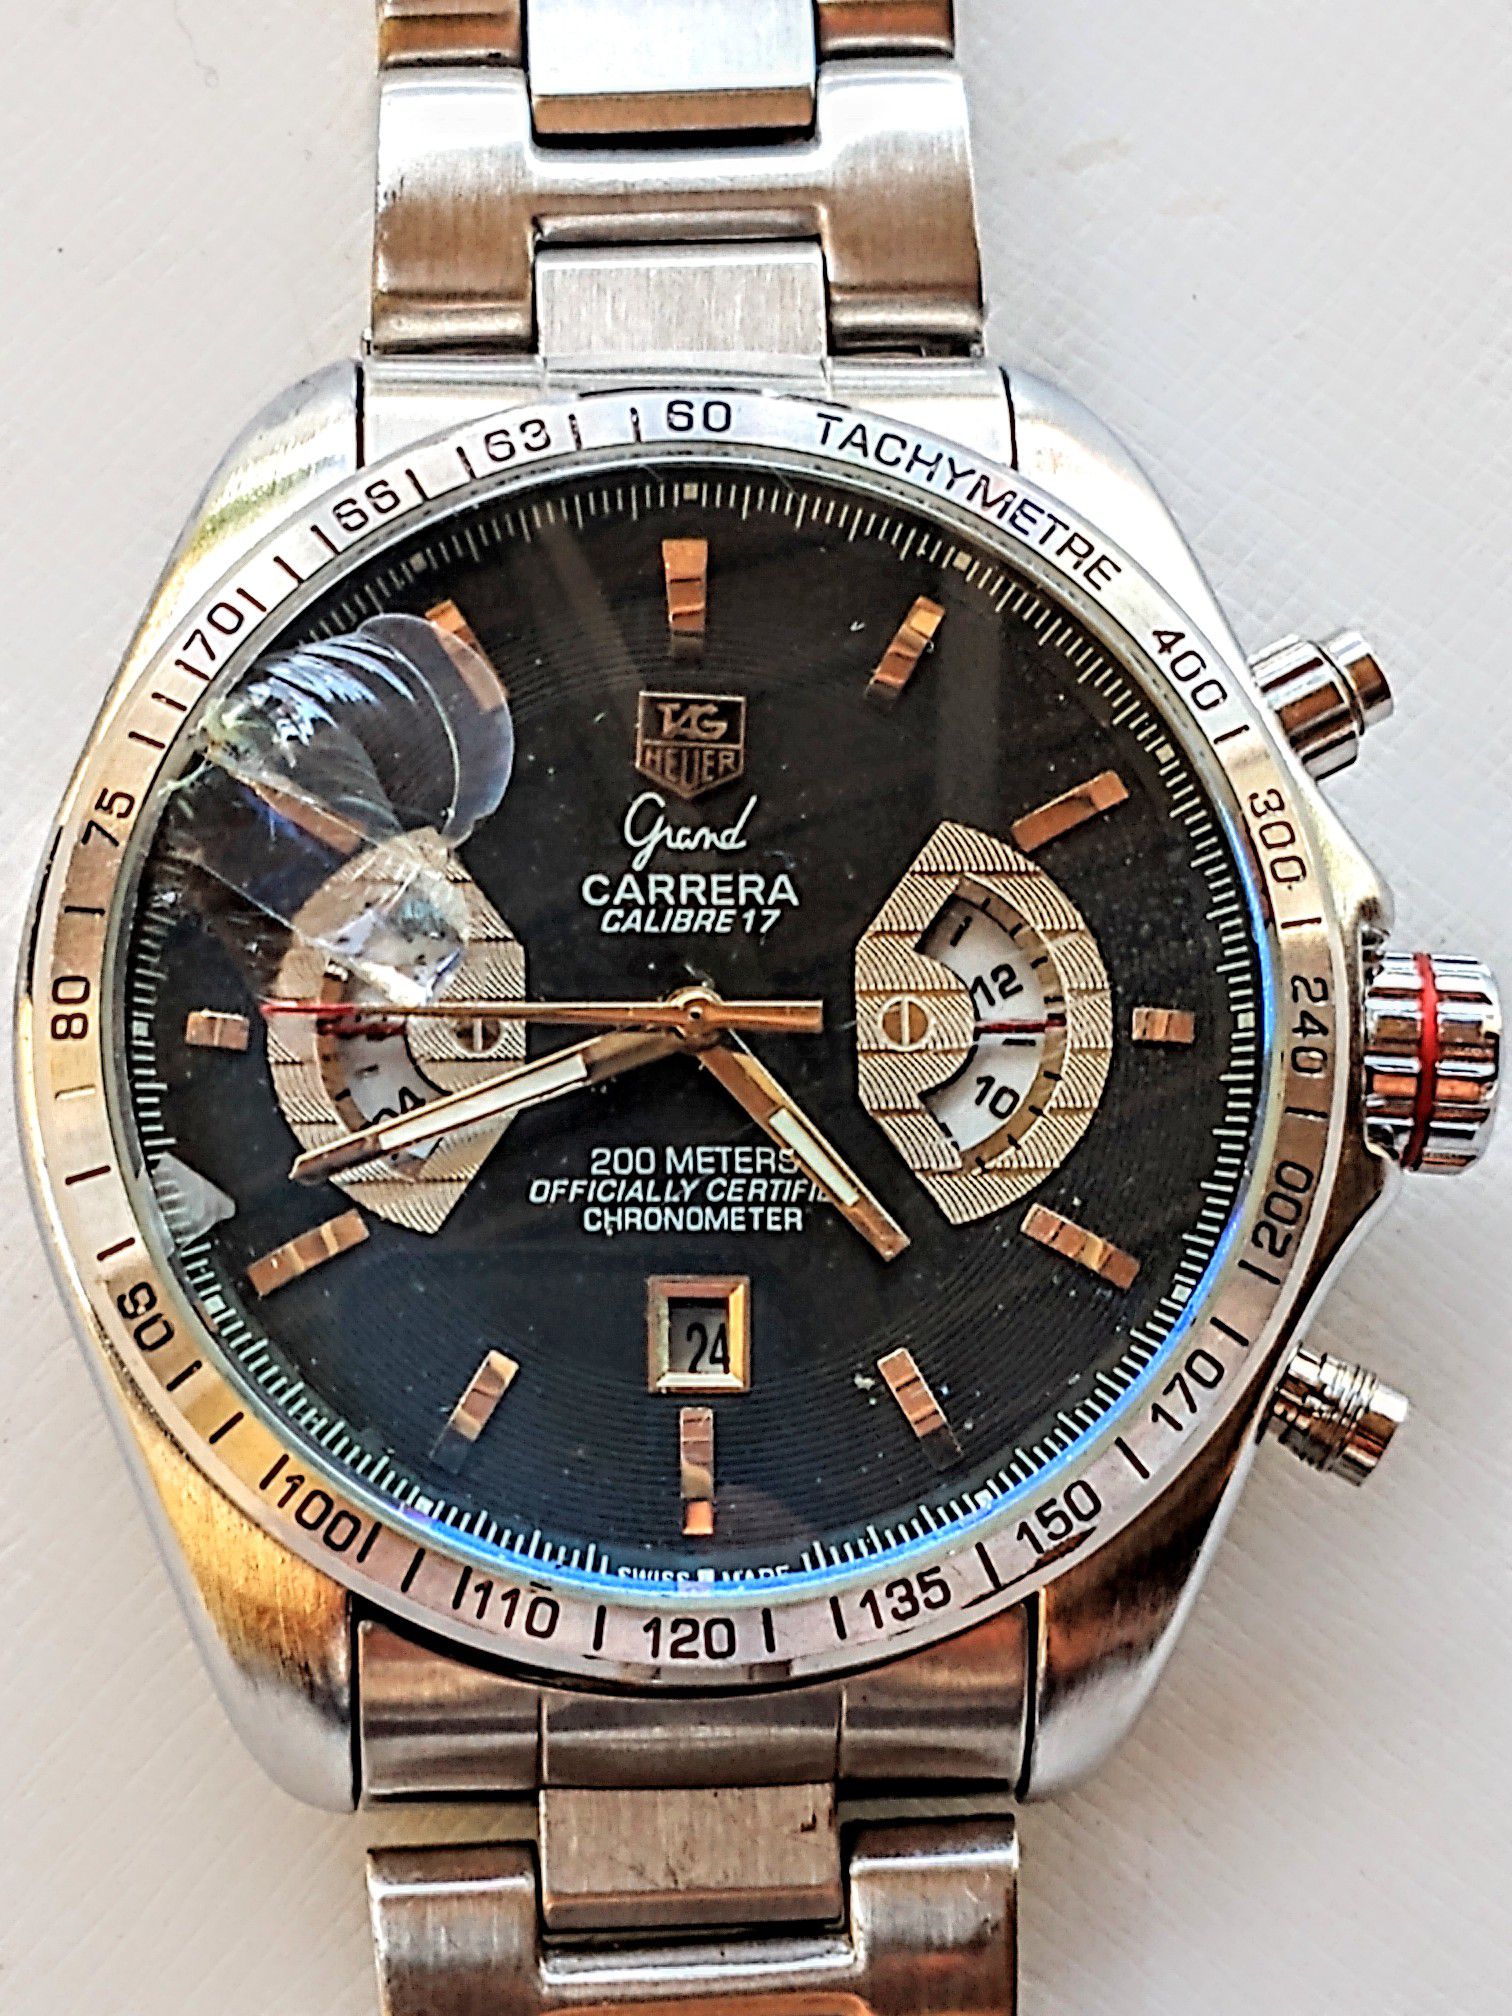 TAG Heuer Grand Carrera for $2,431 for sale from a Private Seller